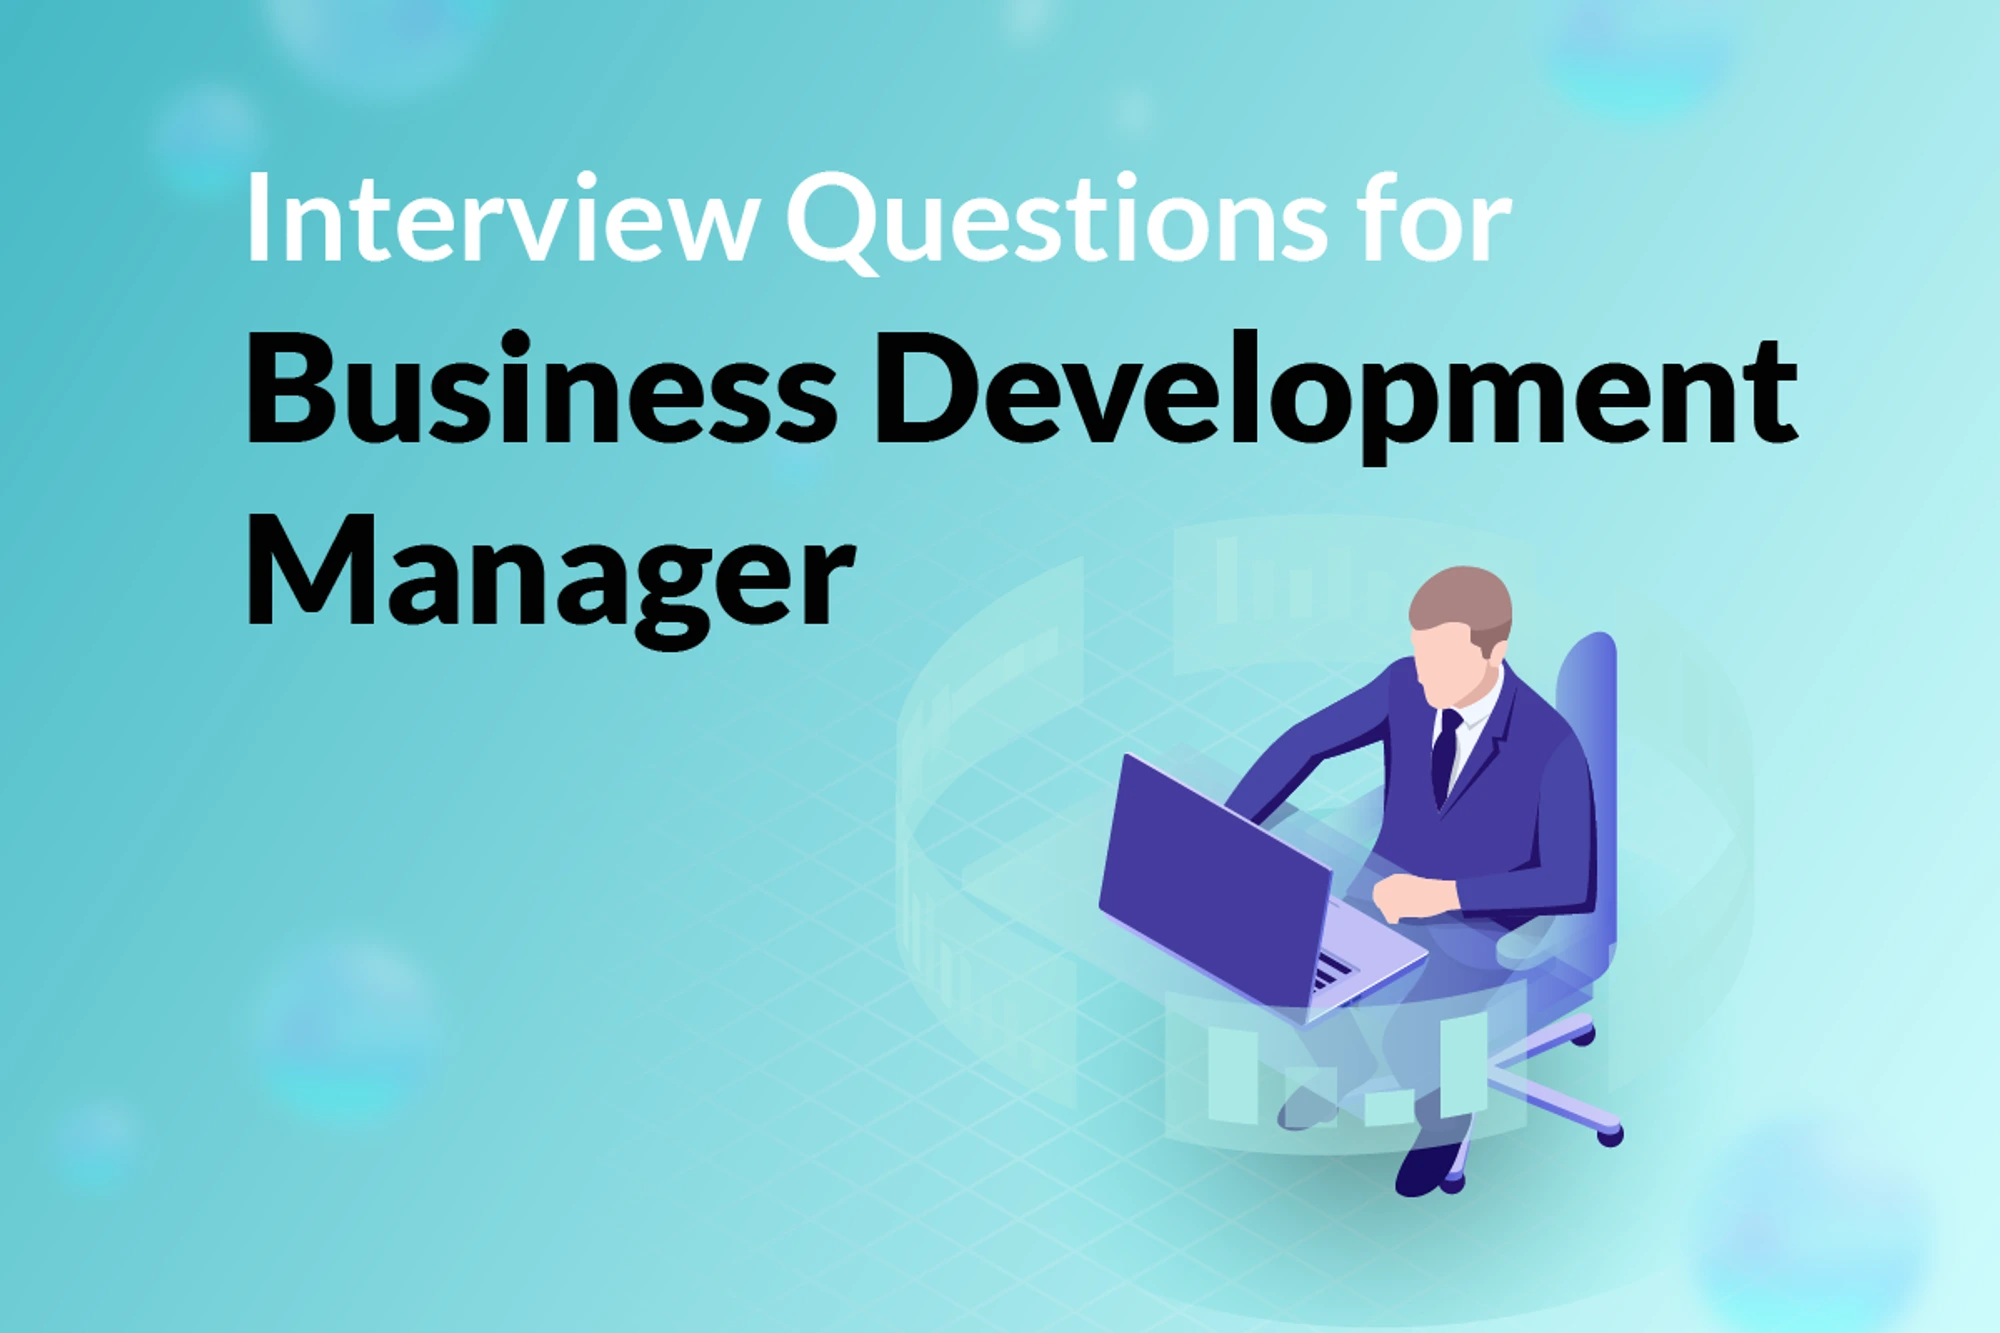 Interview Questions for Business Development Manager